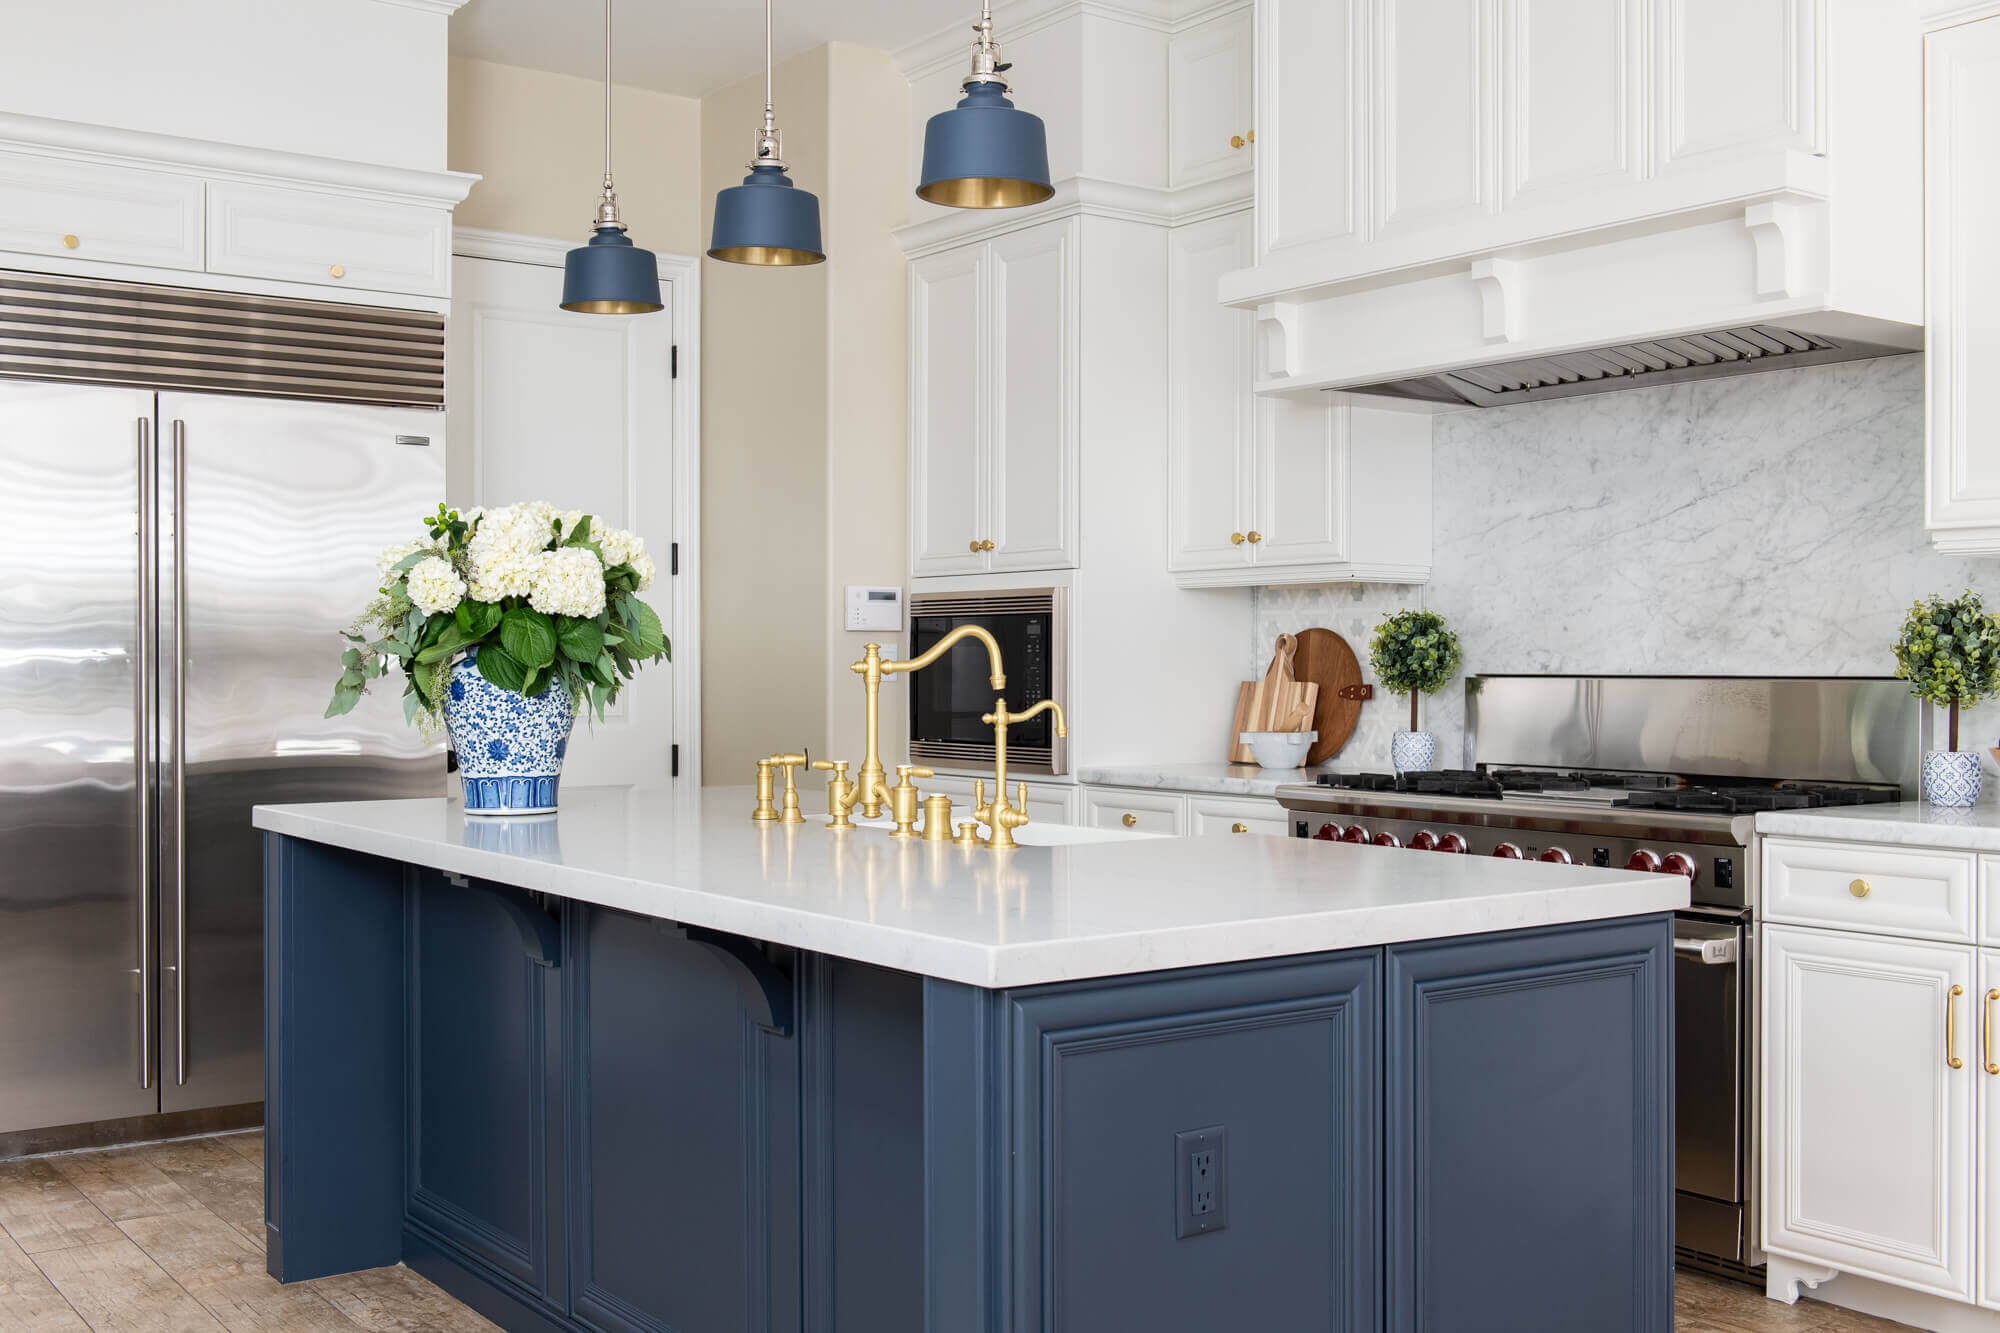 Reasons To Hire A Kitchen Designer